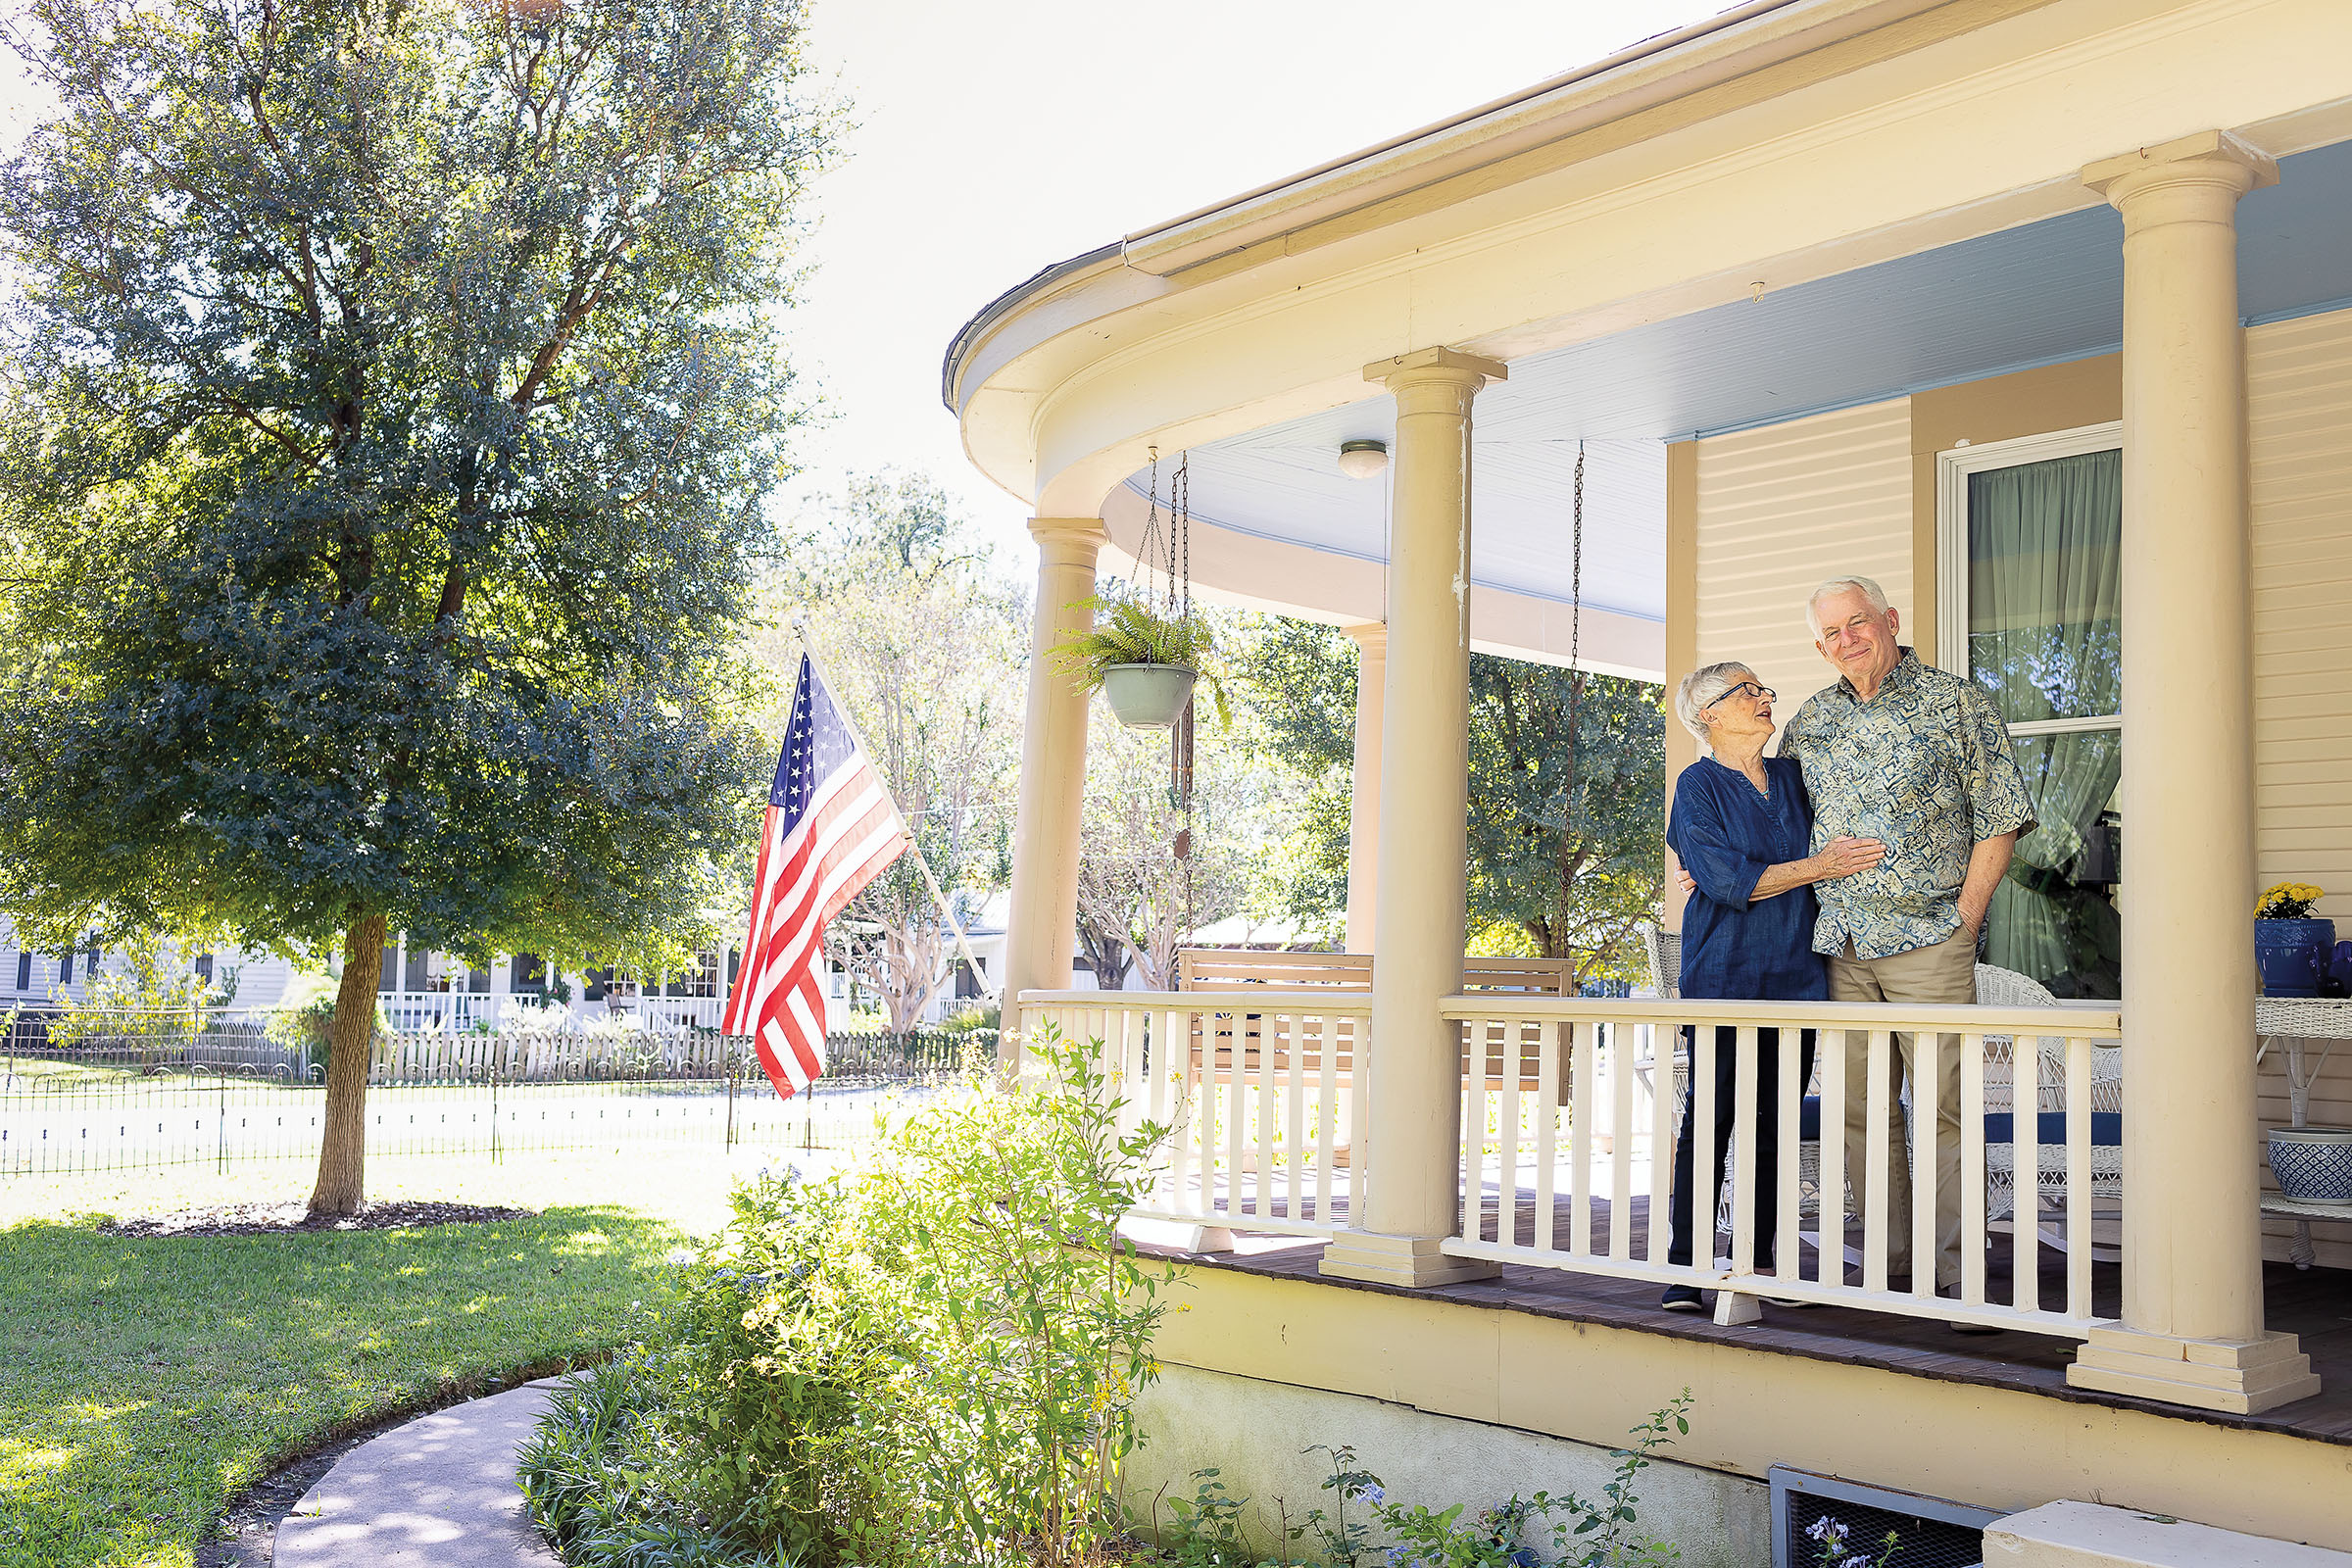 An older woman and man stand on the porch of a large house with columns and an American flag on the porch